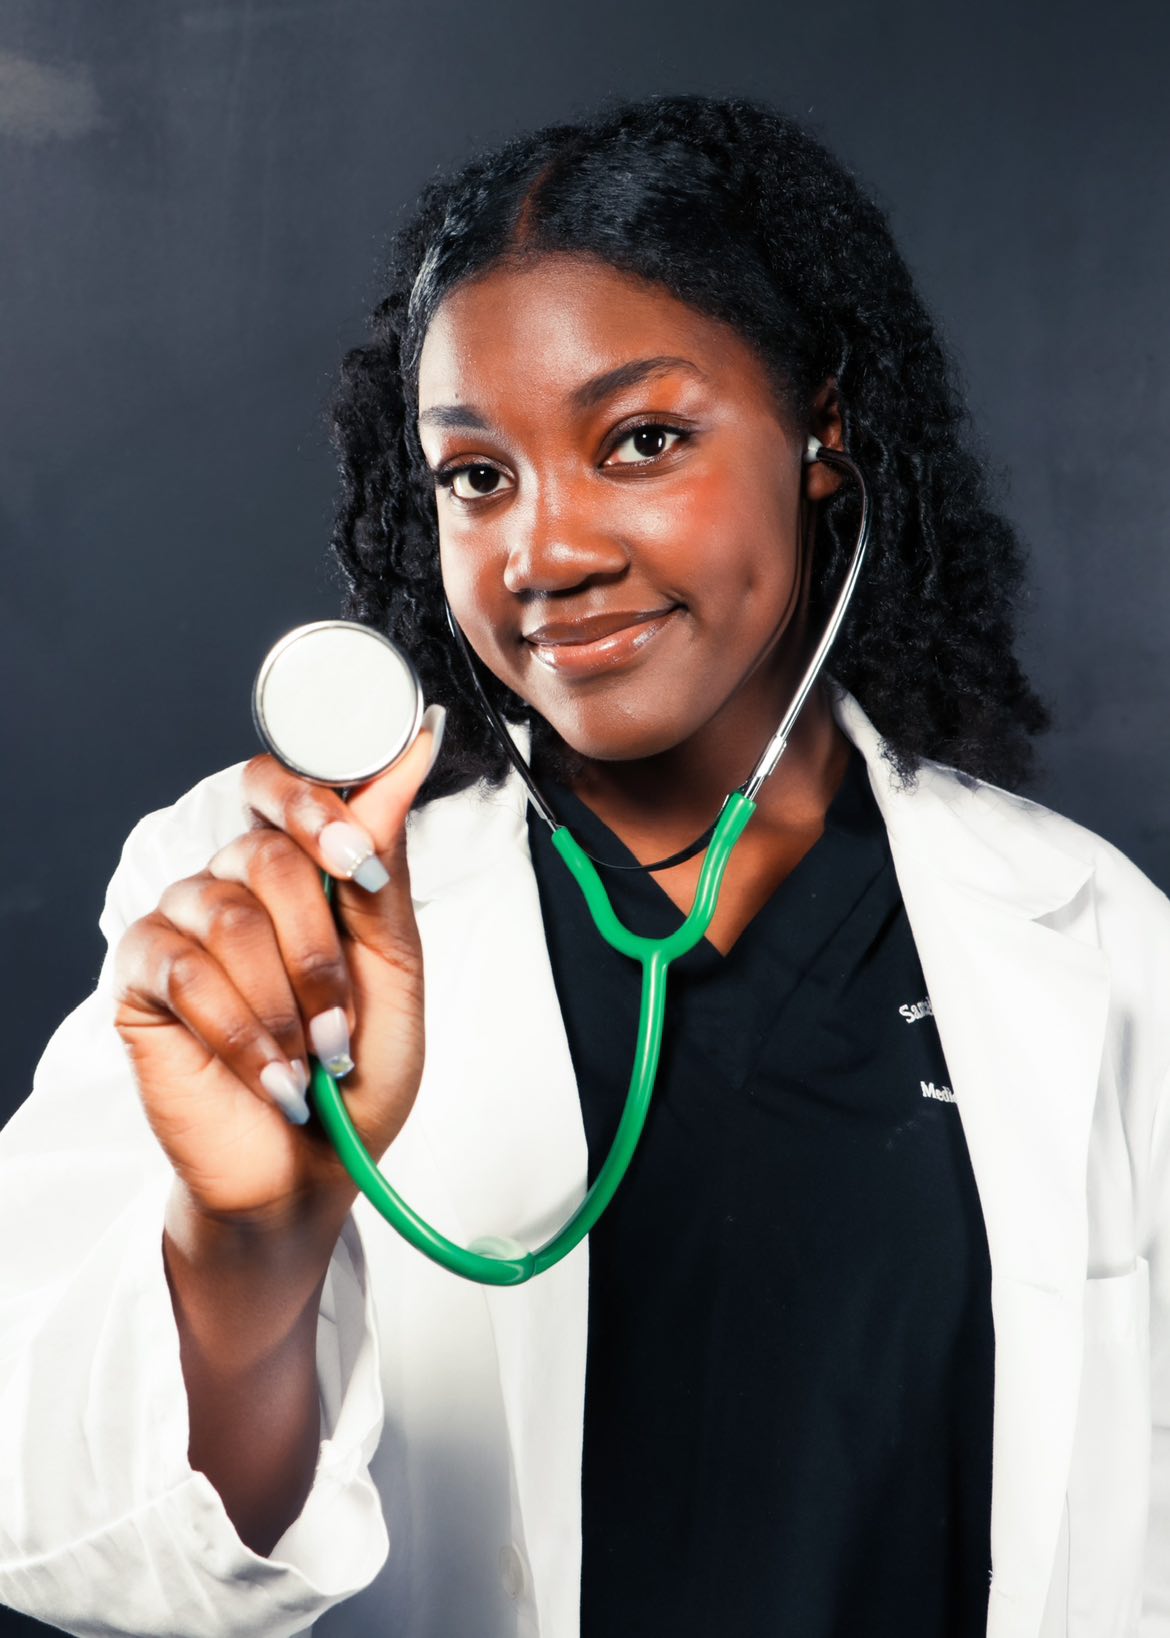 Dainelle Mildorts senior photo showcasing her passion in the medical field.